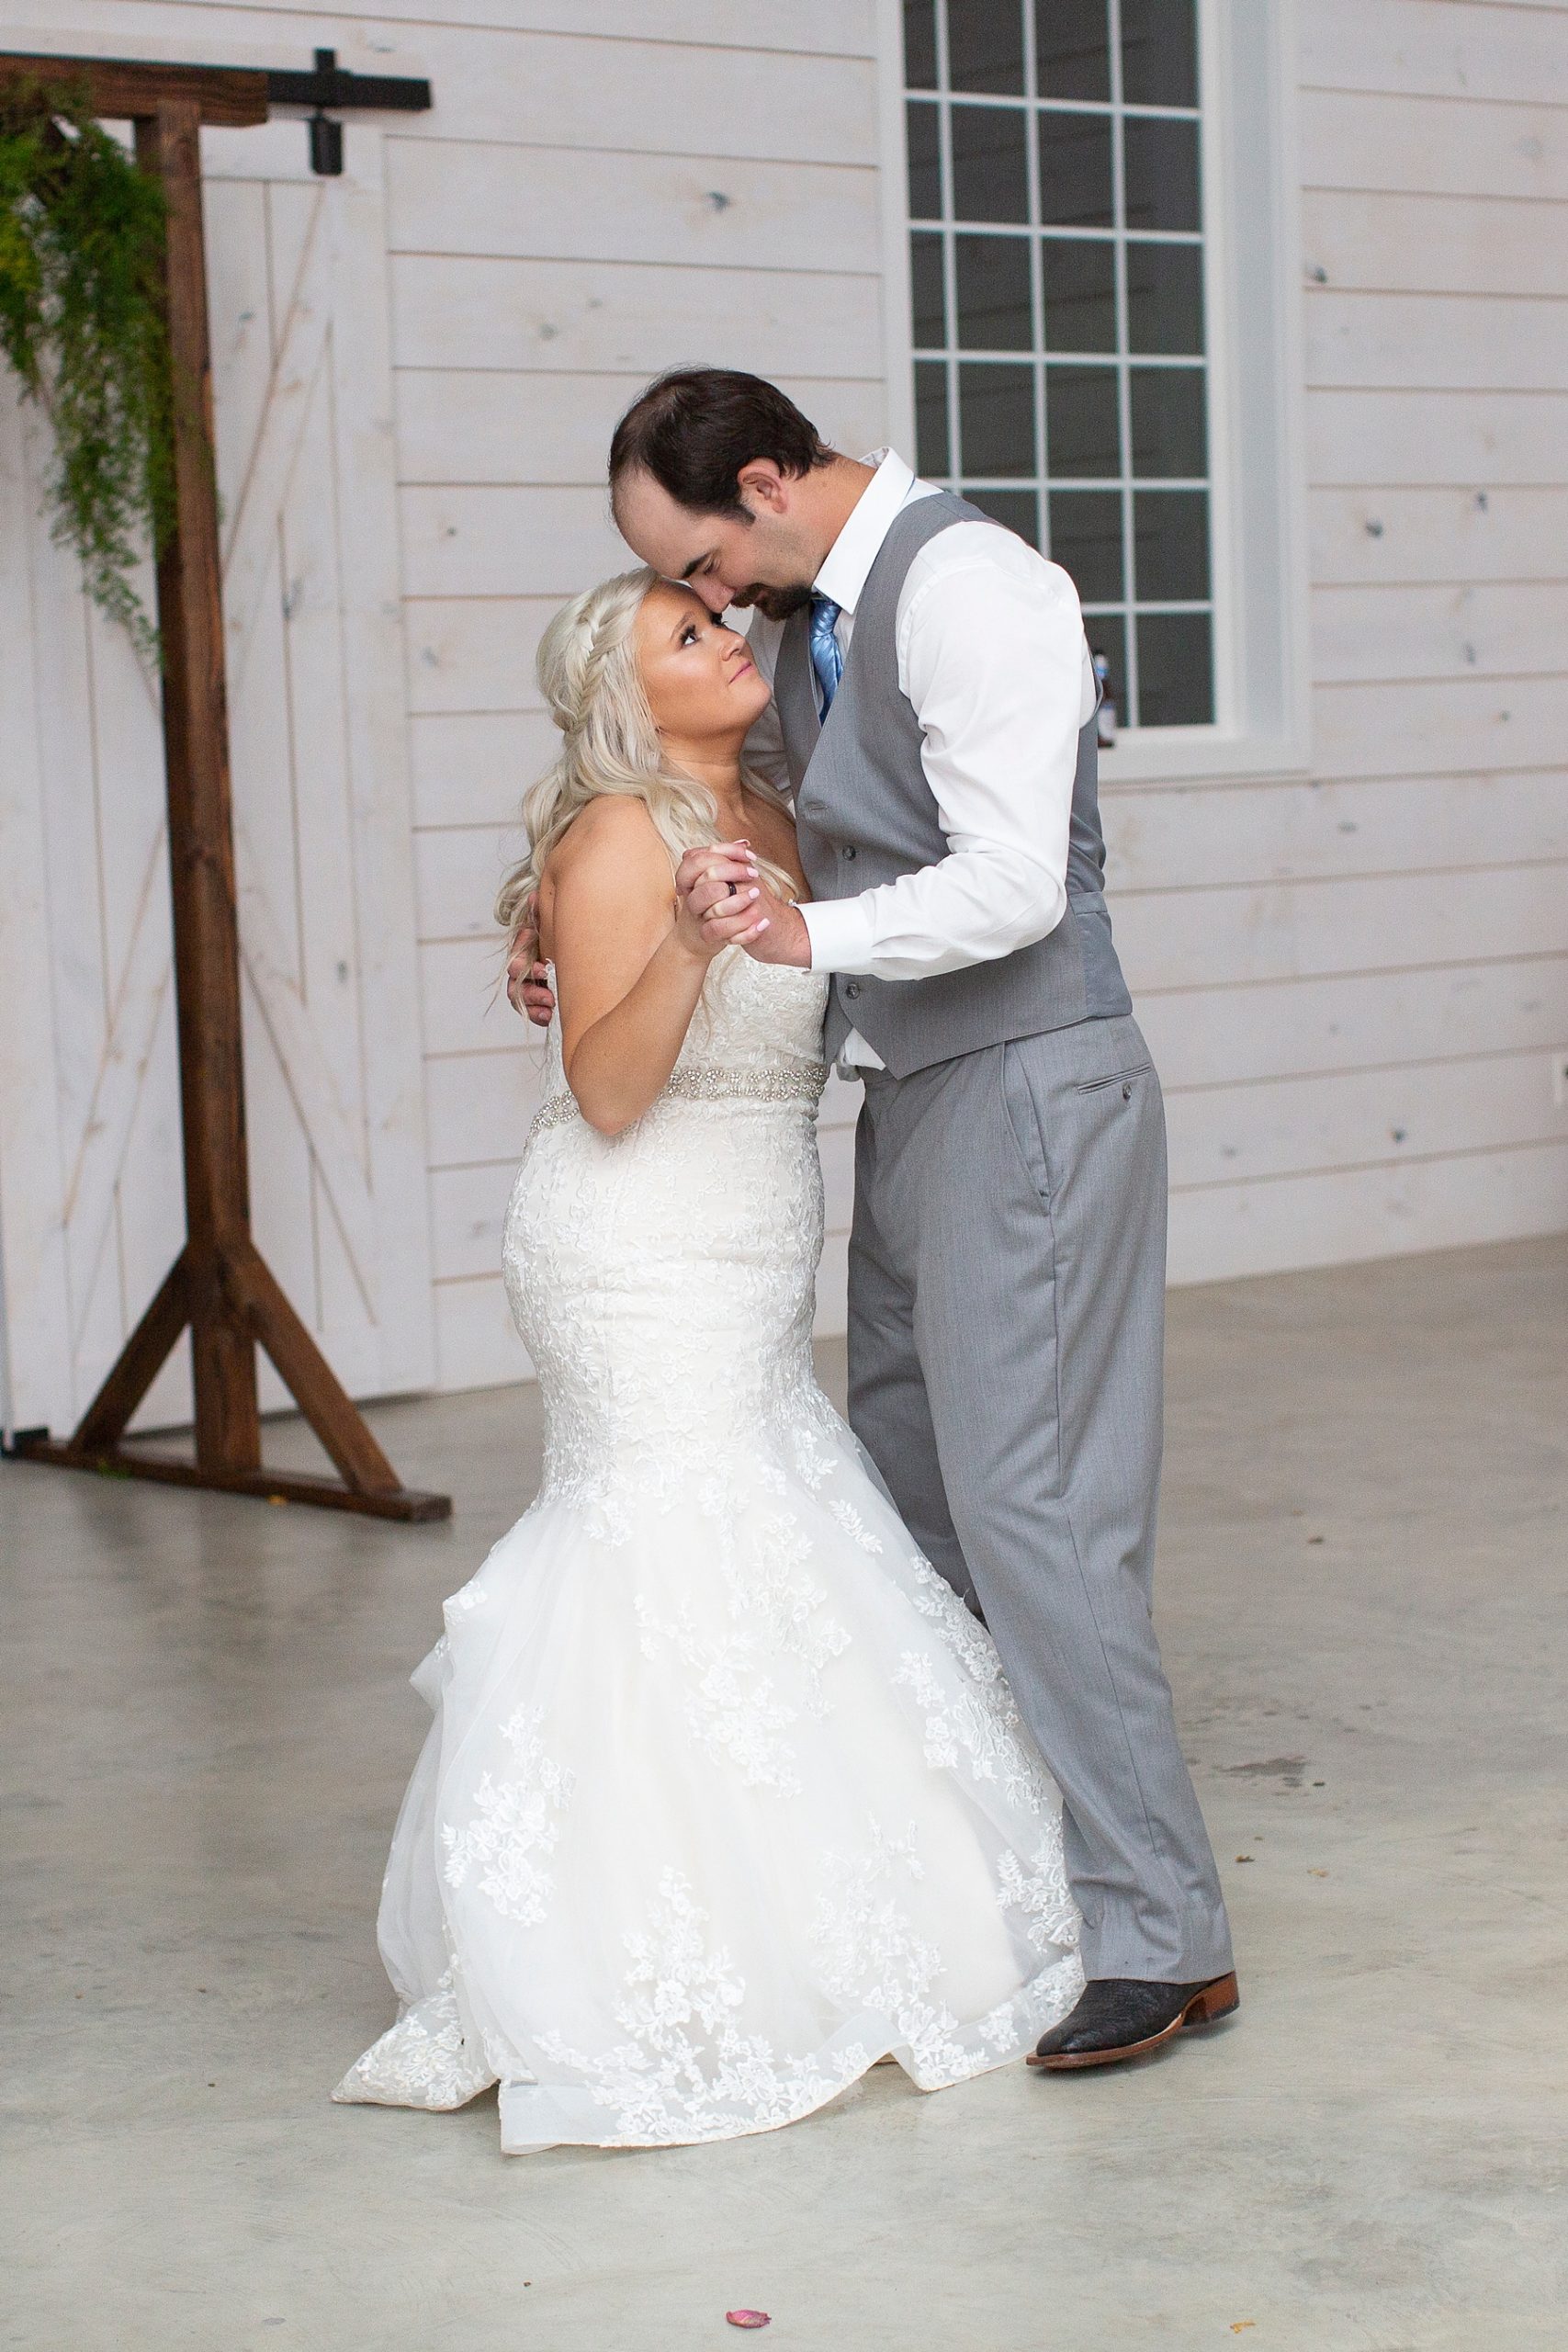 private final dance for newlyweds photographed by Randi Michelle Weddings